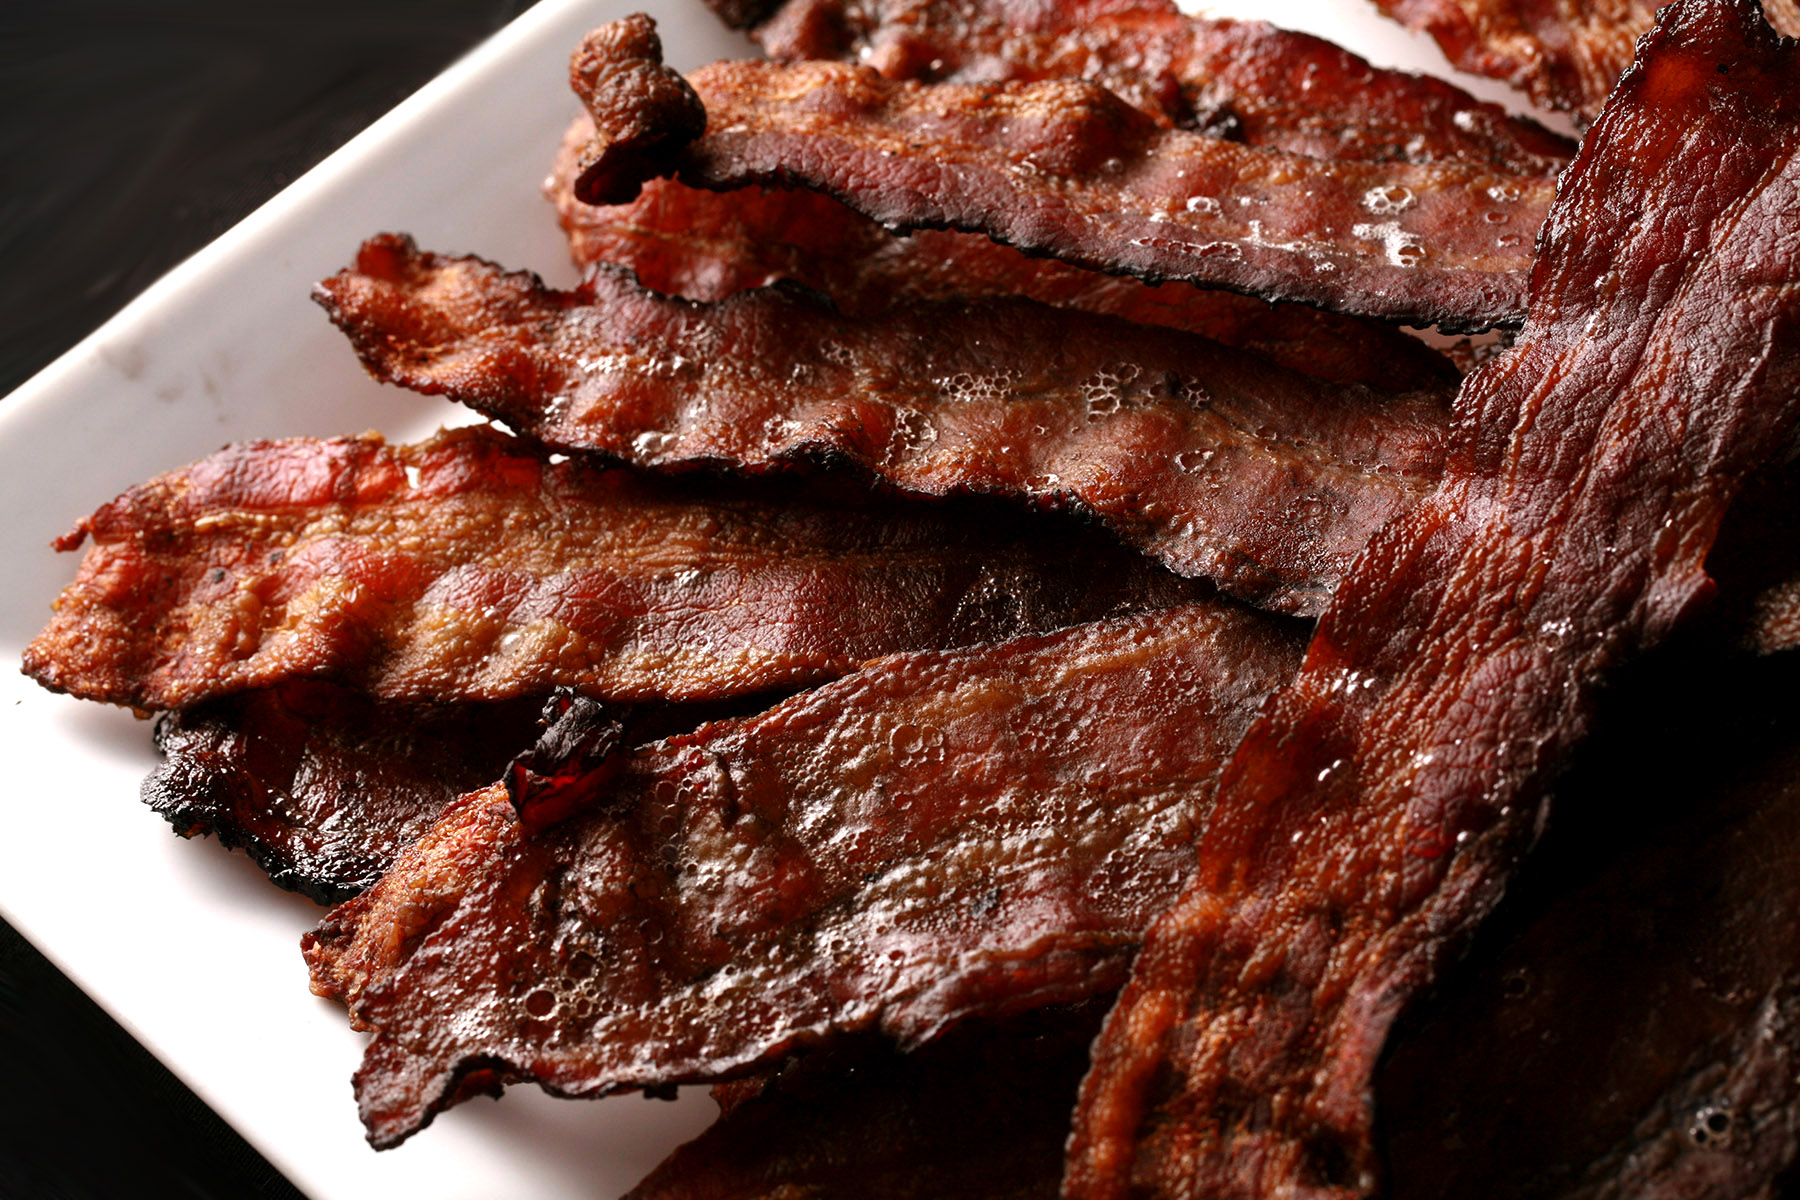 A plate piled high with crispy smoked bacon slices.